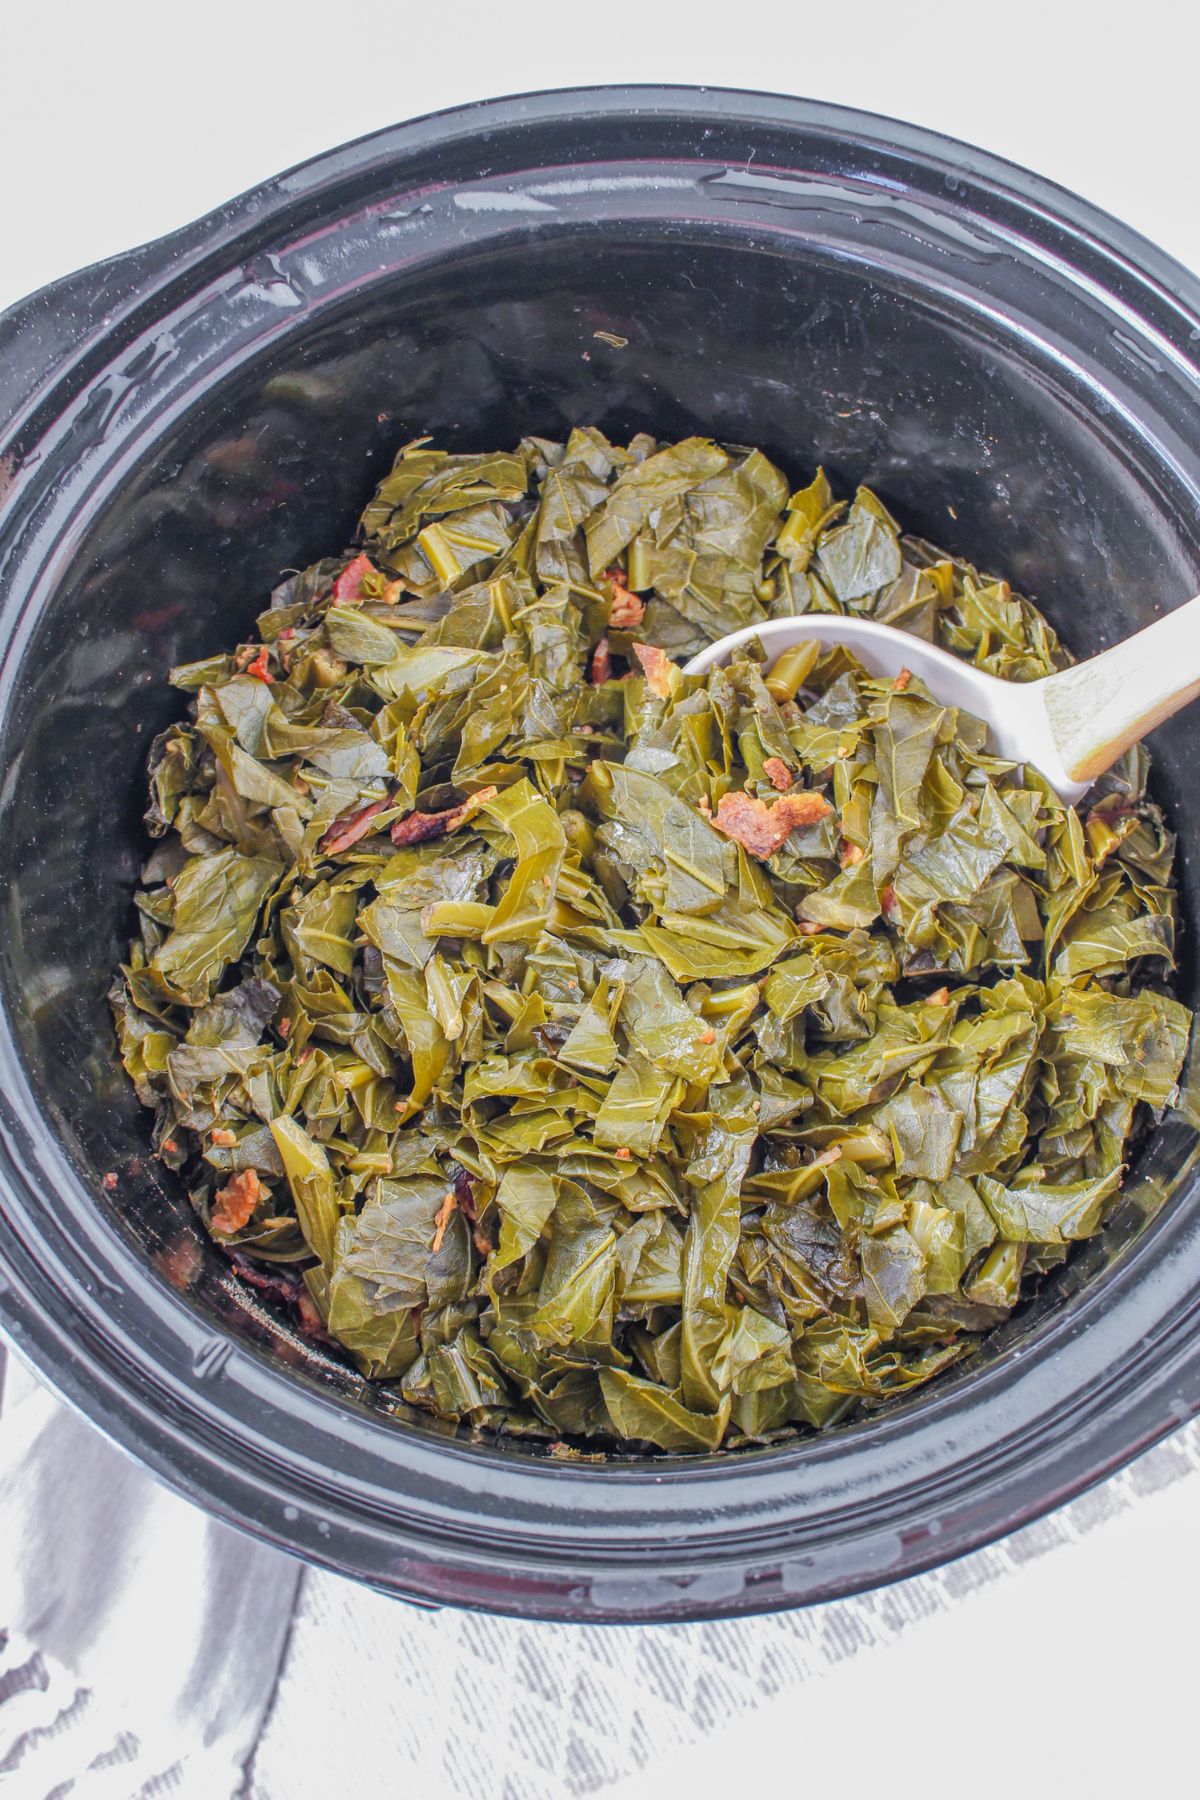 slow cooker filled with collard greens